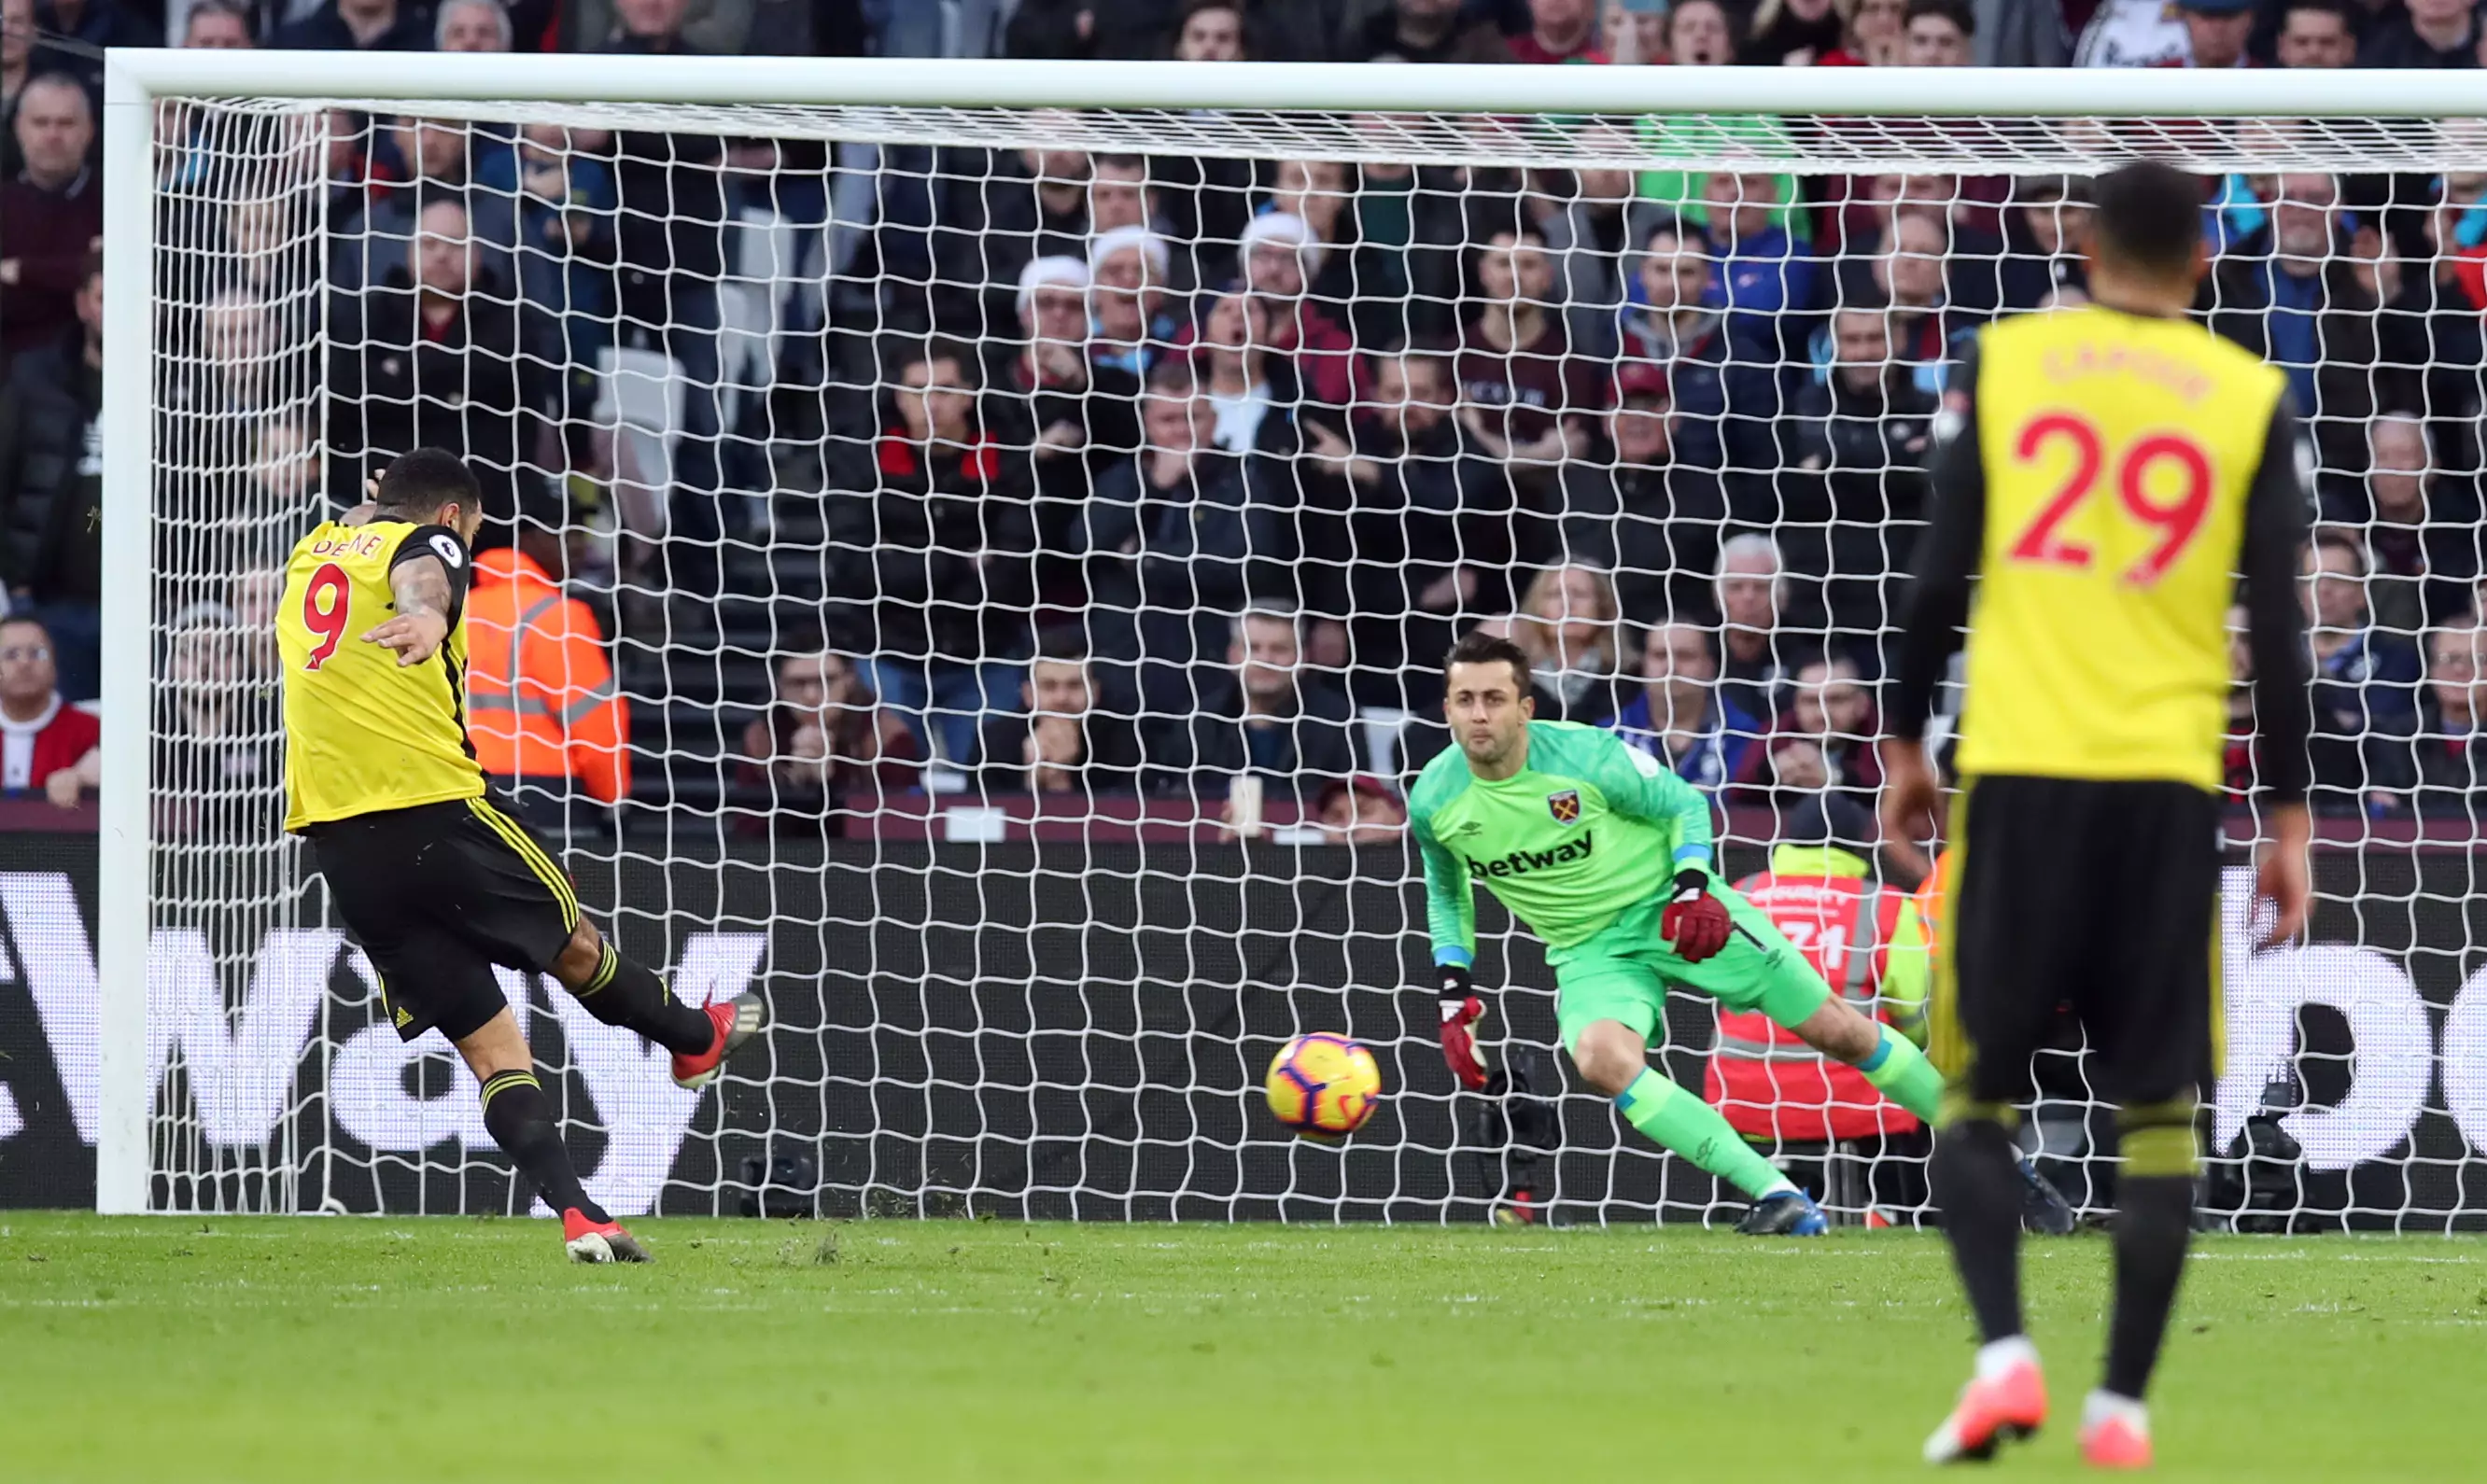 Watford's only spot kick in the league came against West Ham. Image: PA Images